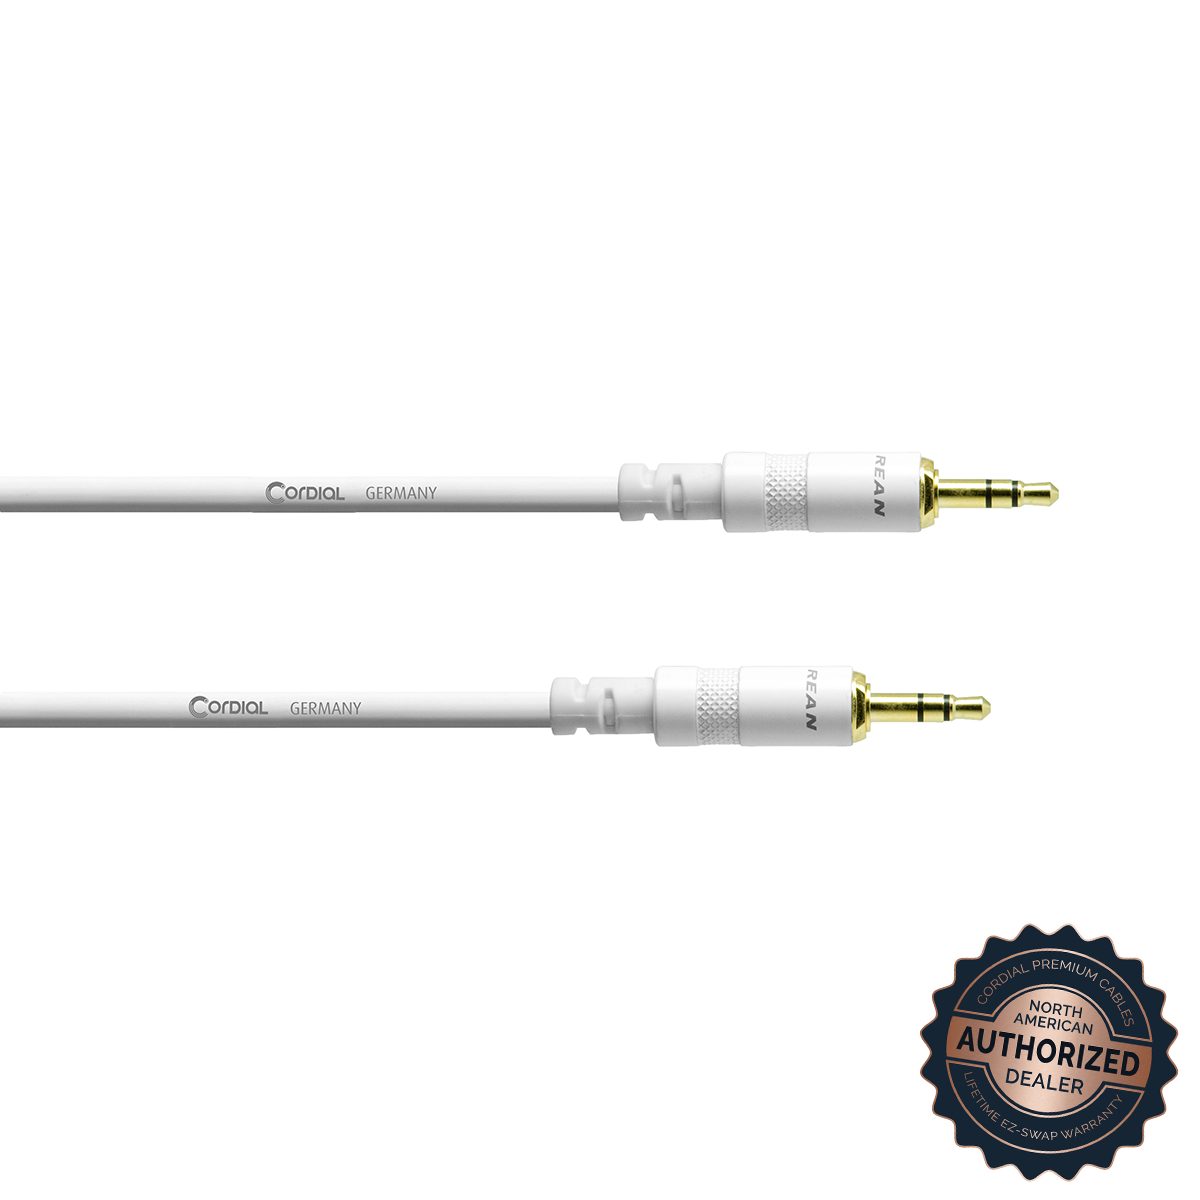 Cordial Stereo Headphone/Line Adapter/Extender; White, 3ft.

CFS 0.9 WW - SNOW

1/8" TRS Male to 1/8" TRS Male; White, 3ft.